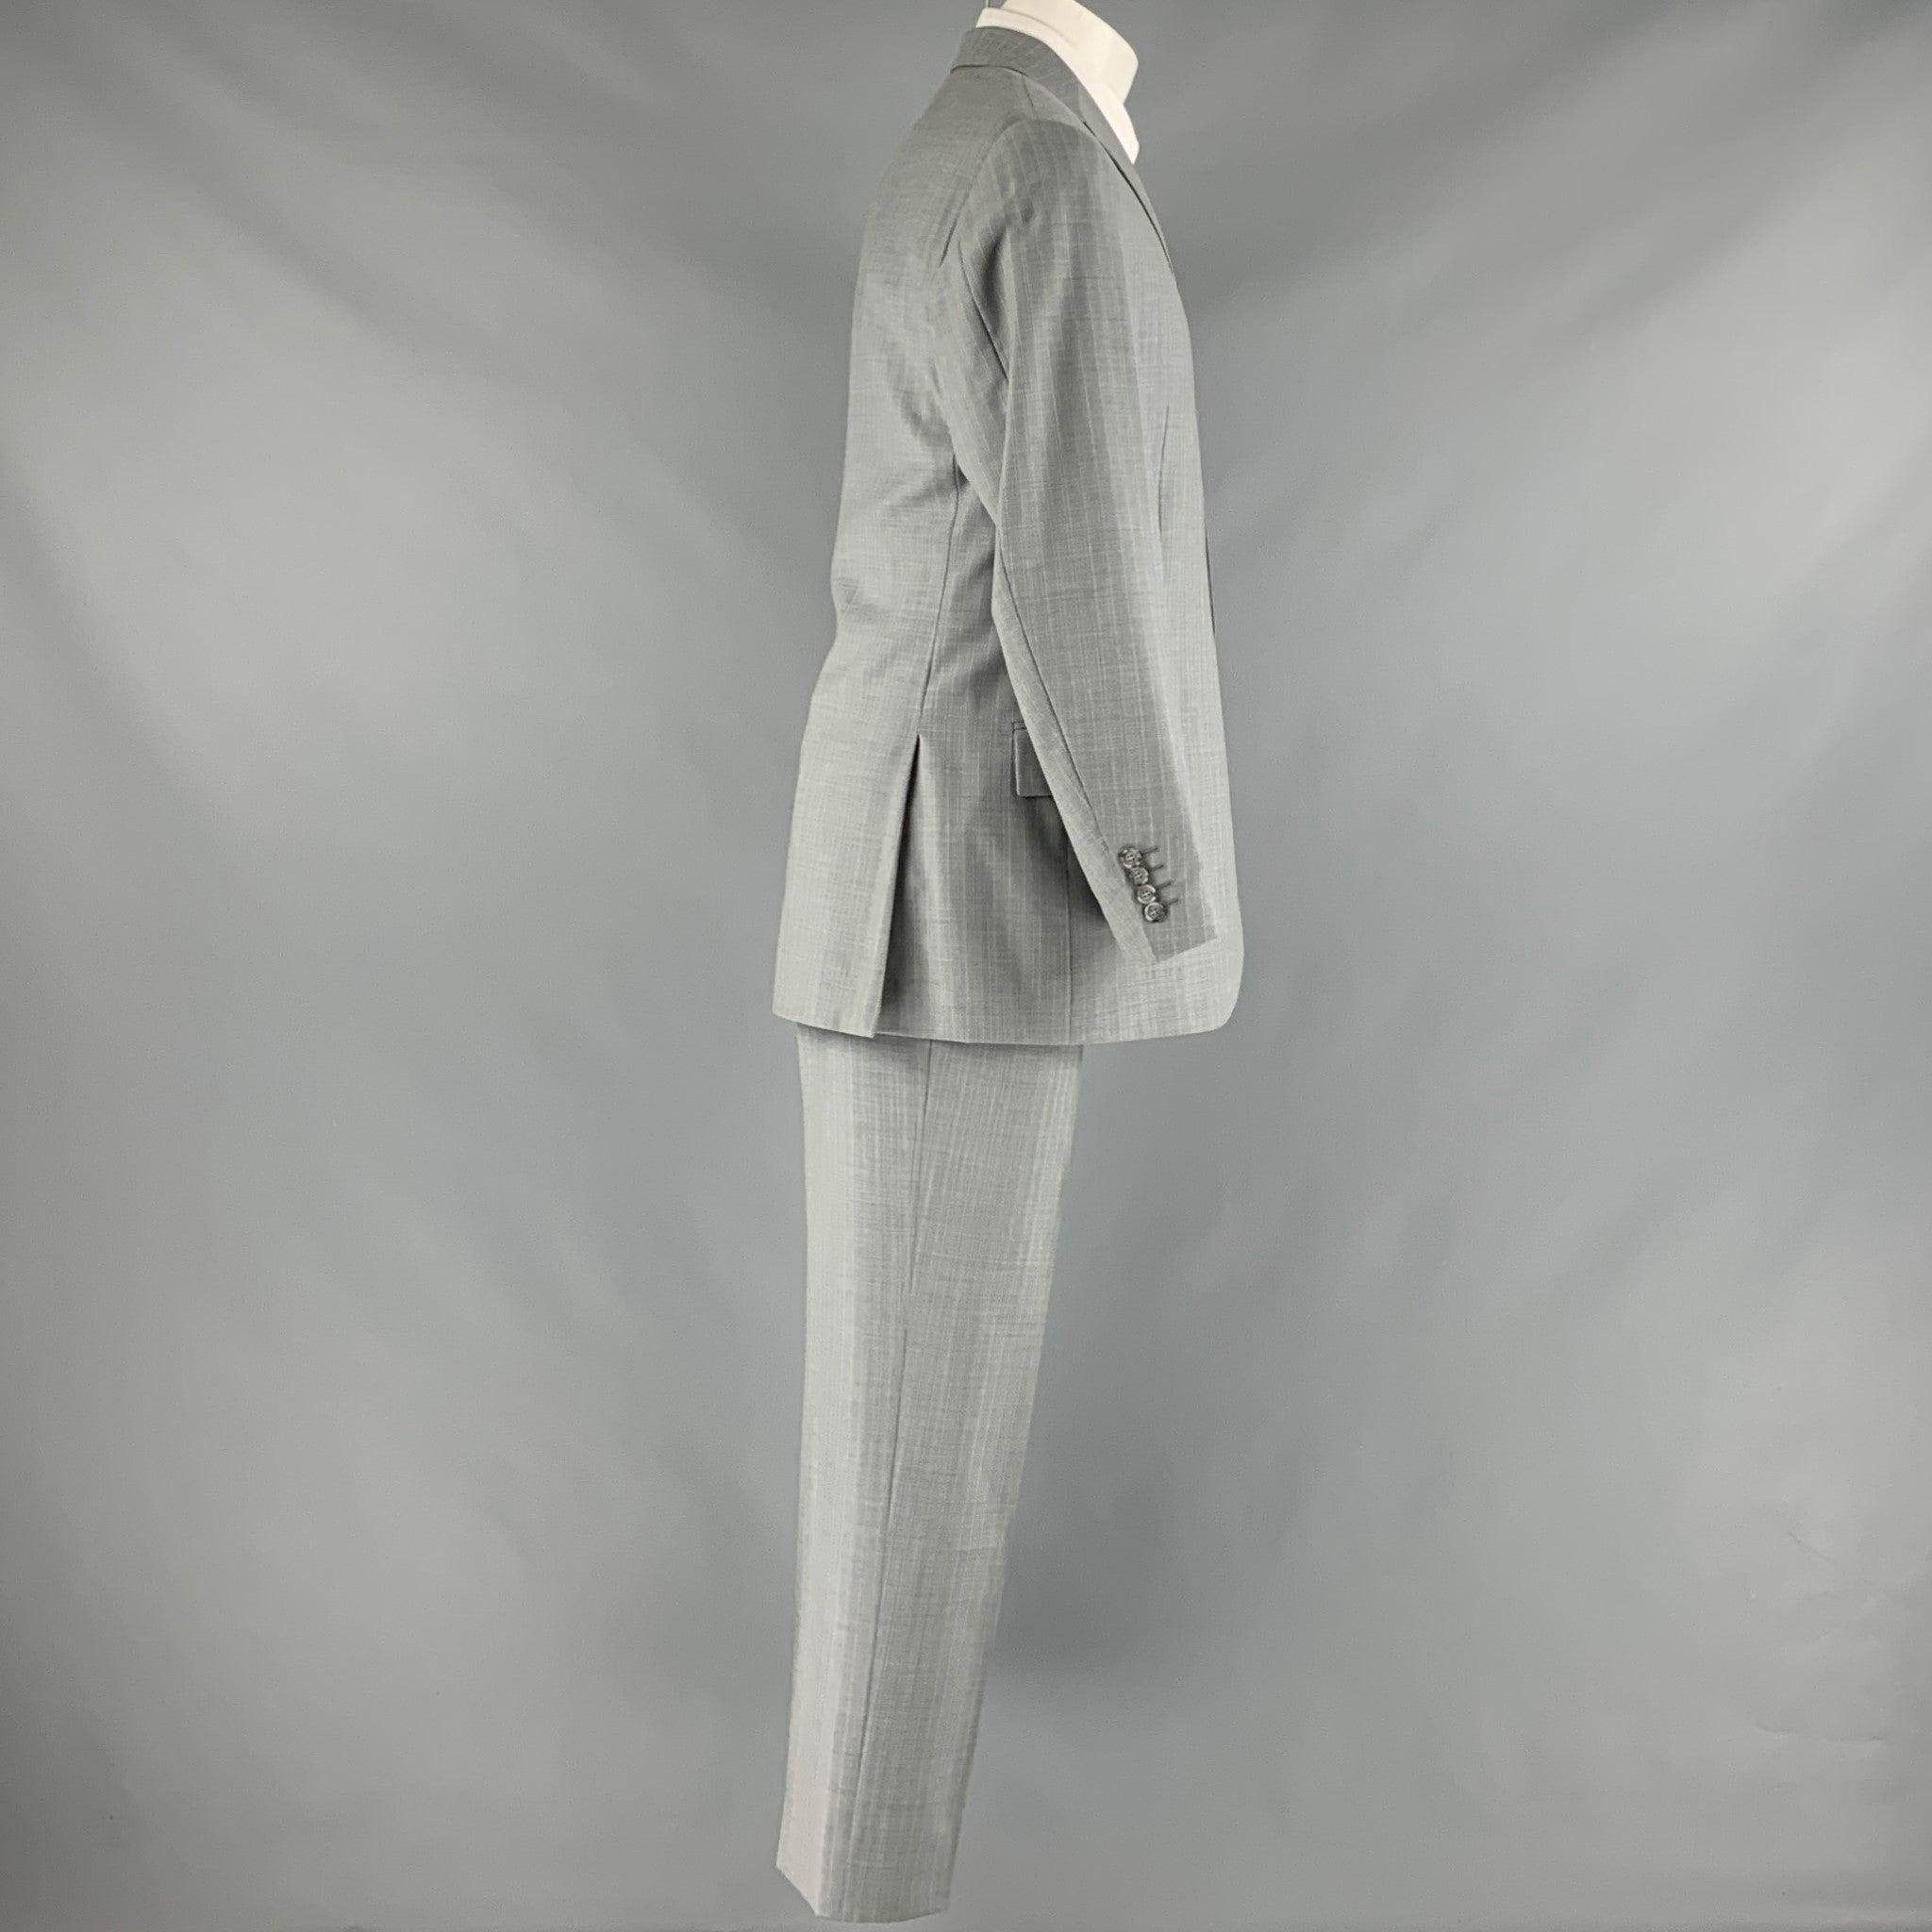 CORNELIANI suit in a grey and cream pinstripe wool with a full liner and includes a single breasted, three button sport coat with notch lapel and matching flat front trousers.Very Good Pre-Owned Condition. Marks on trousers. 

Marked:   40